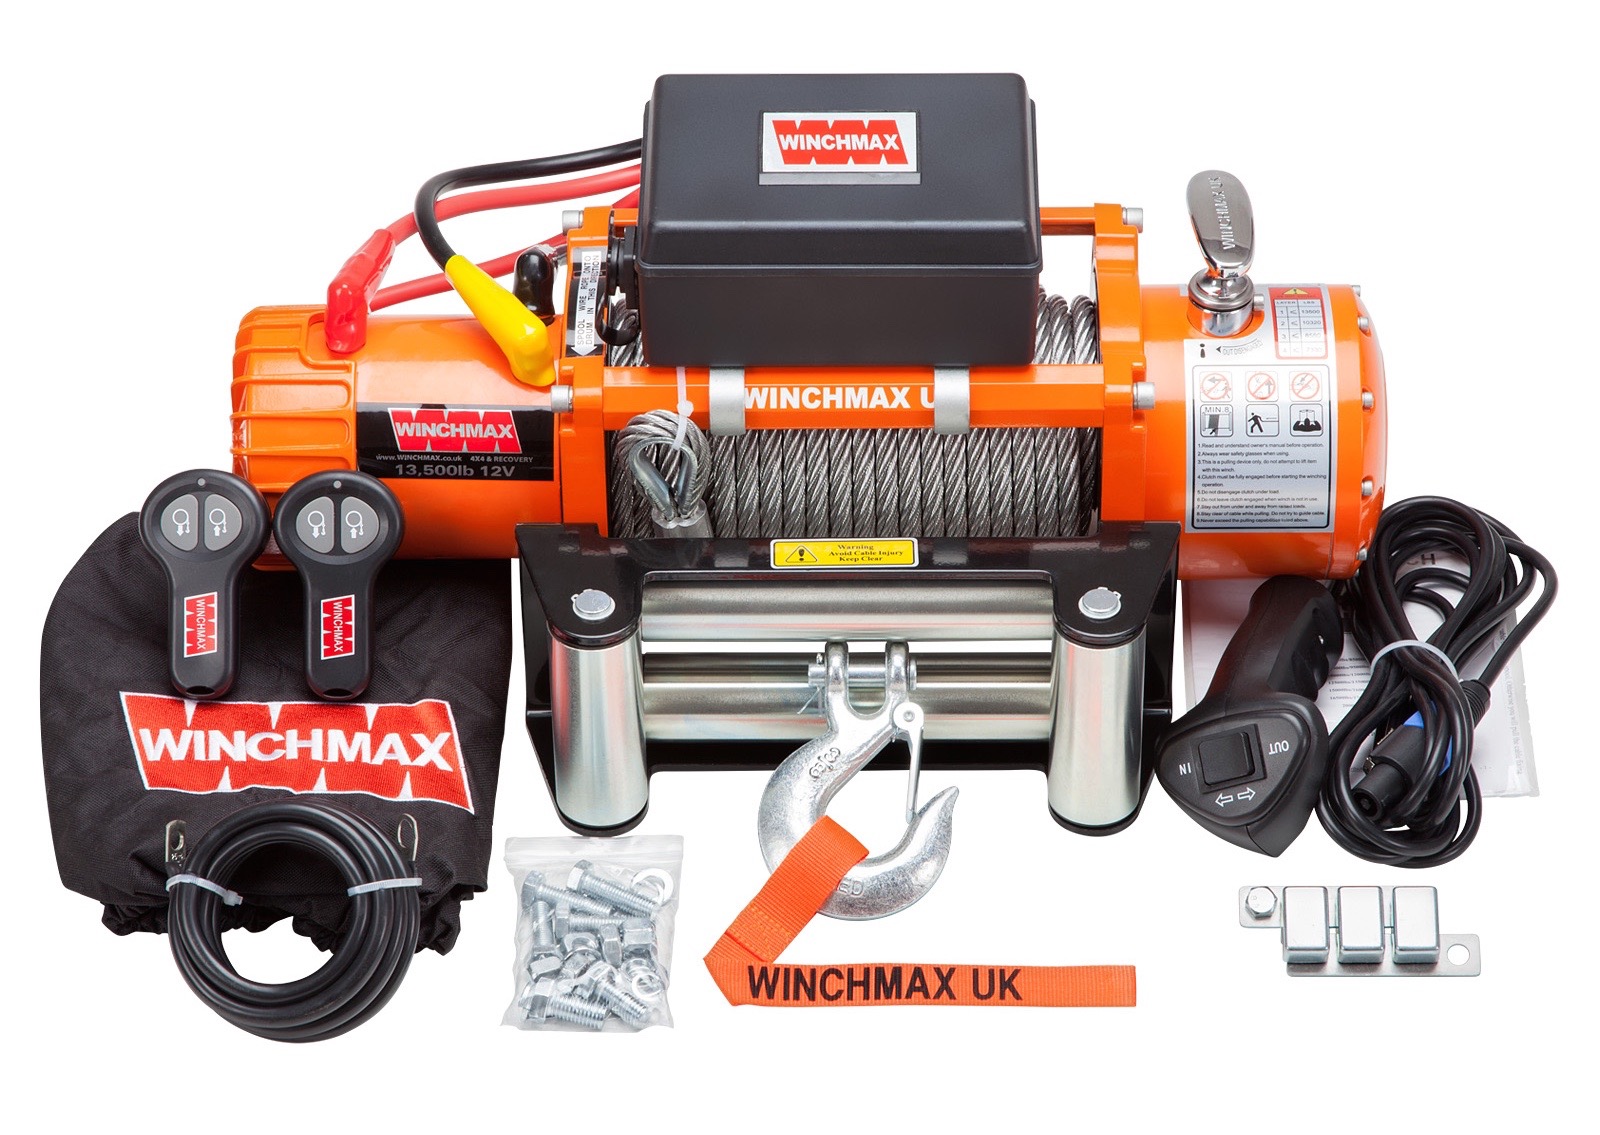 WINCHMAX 13500LB 12V ELECTRIC STEEL CABLE WINCH WITH WIRELESS REMOTES